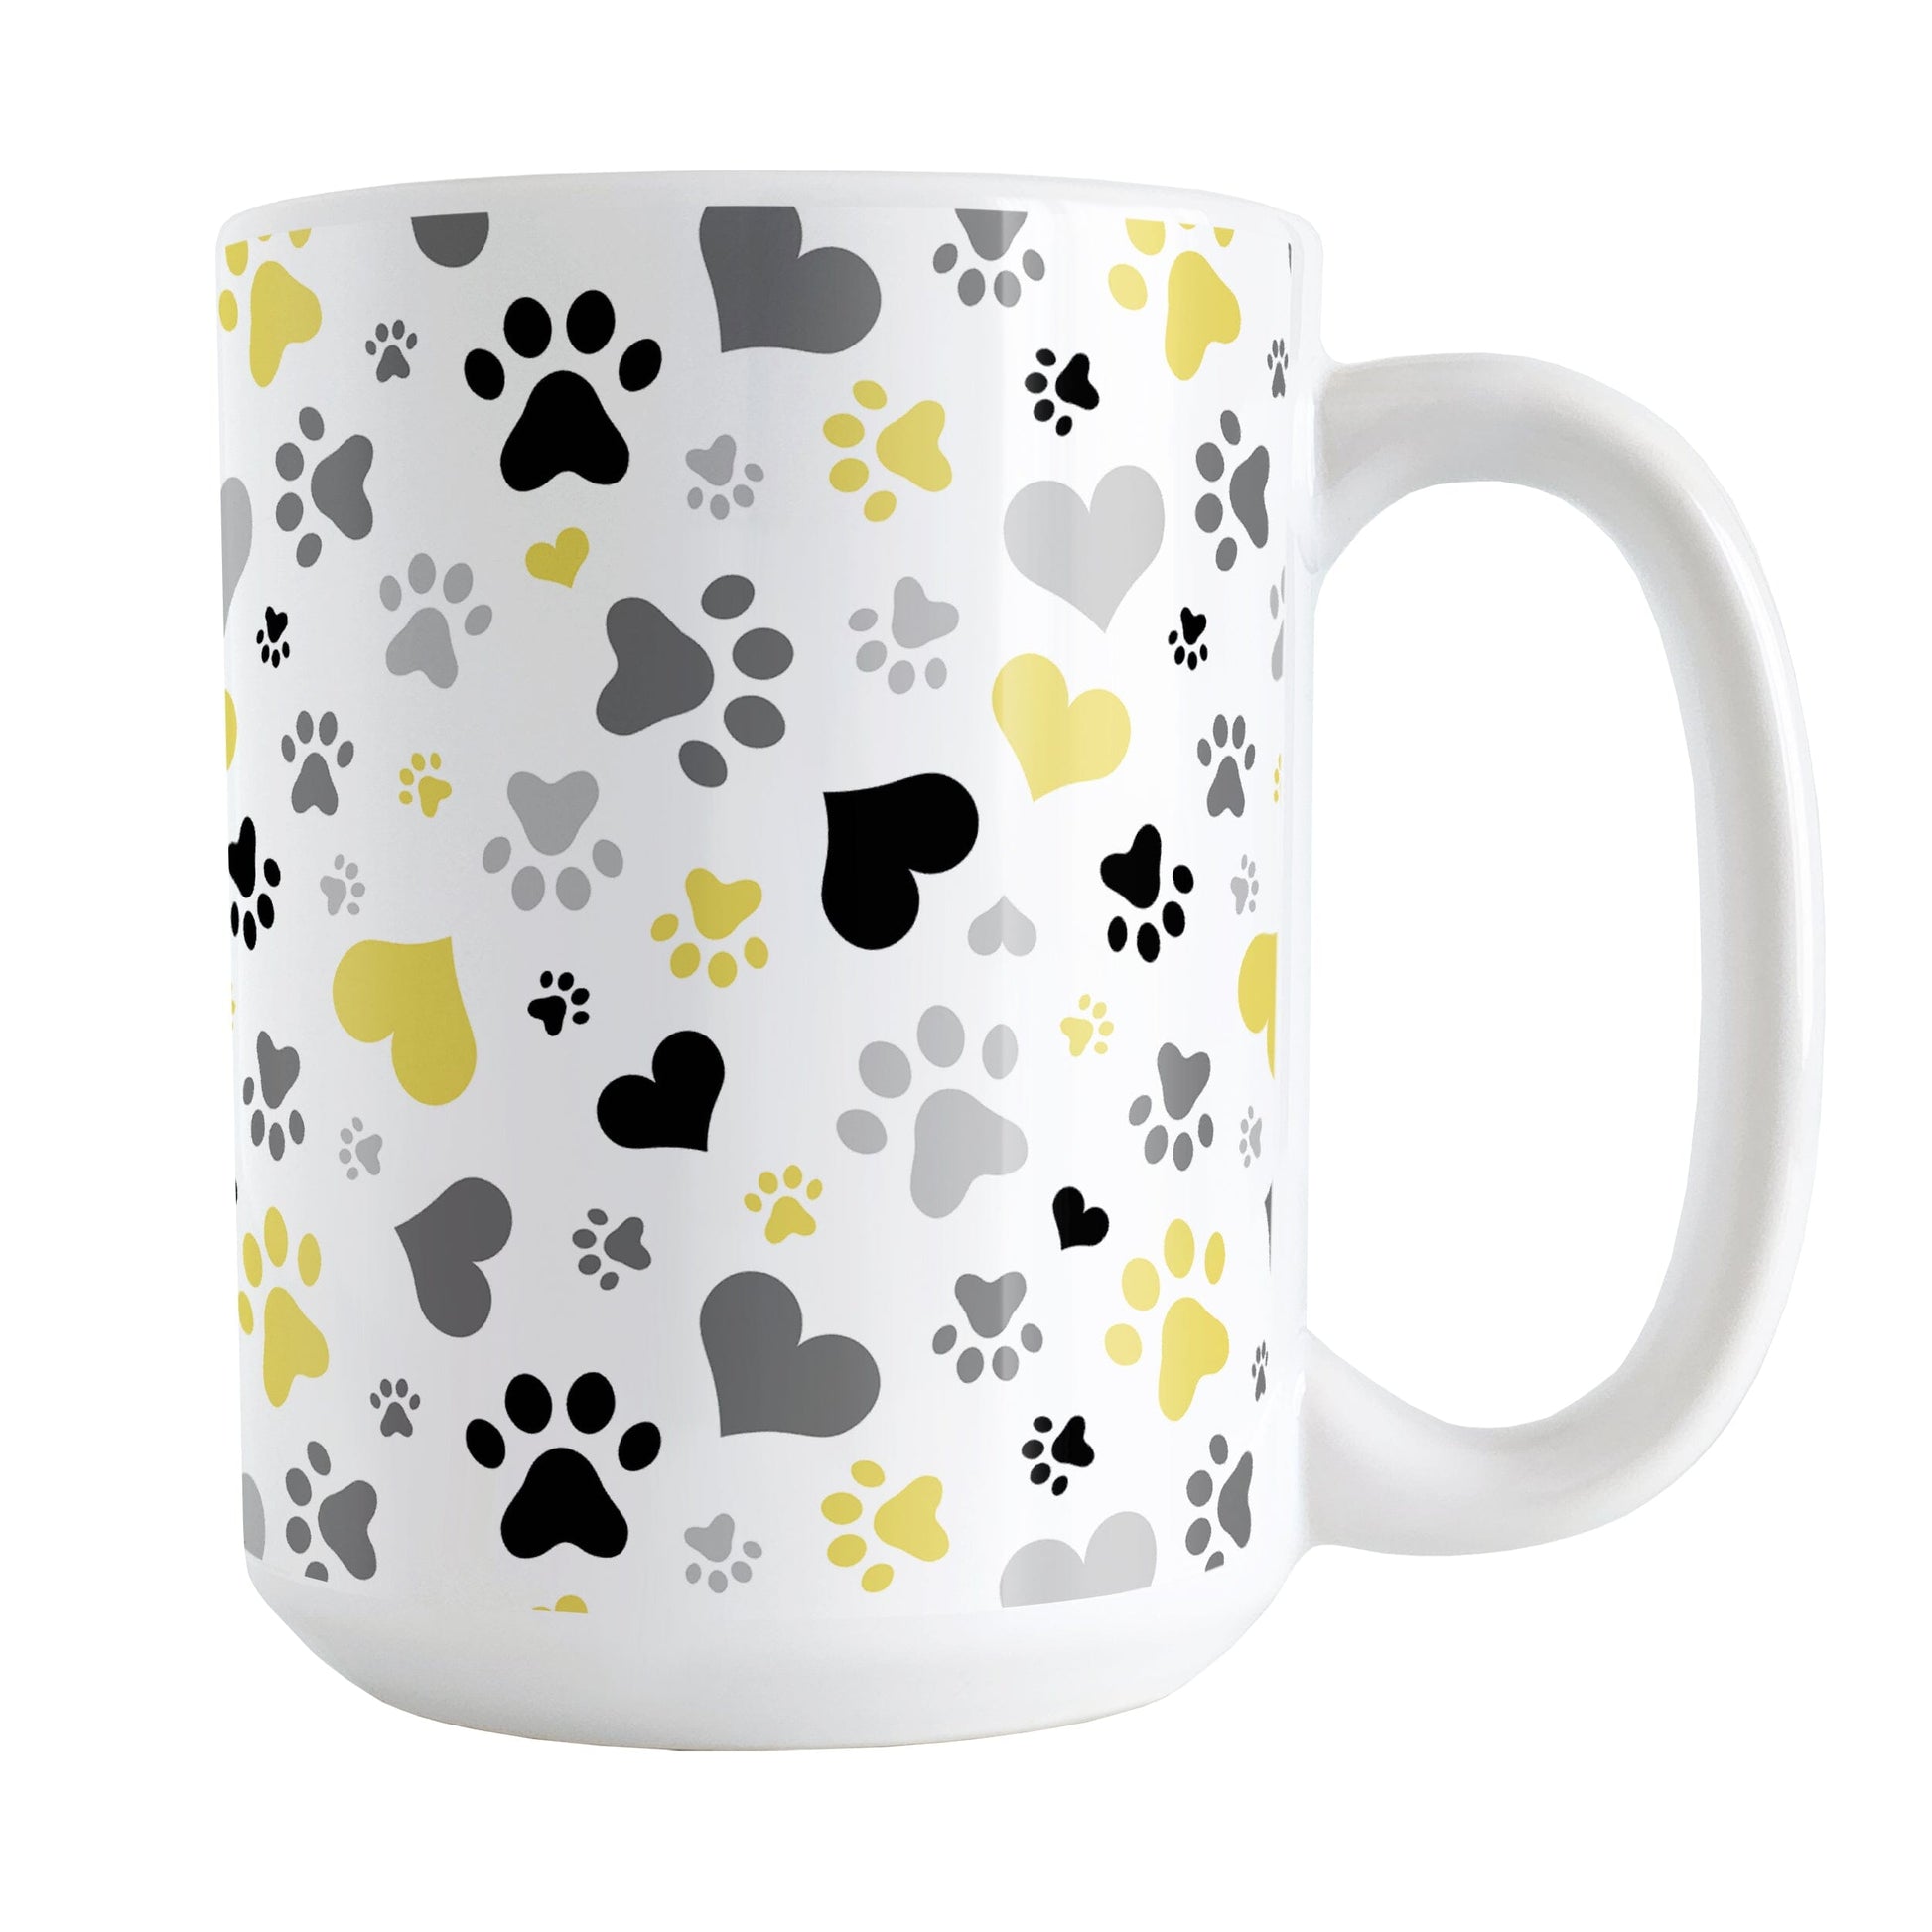 Black and Yellow Hearts and Paw Prints Mug (15oz) at Amy's Coffee Mugs. A ceramic coffee mug designed with a pattern of hearts and paw prints in red and different shades of black and gray that wraps around the mug to the handle. This mug is perfect for people love dogs and cute paw print designs.